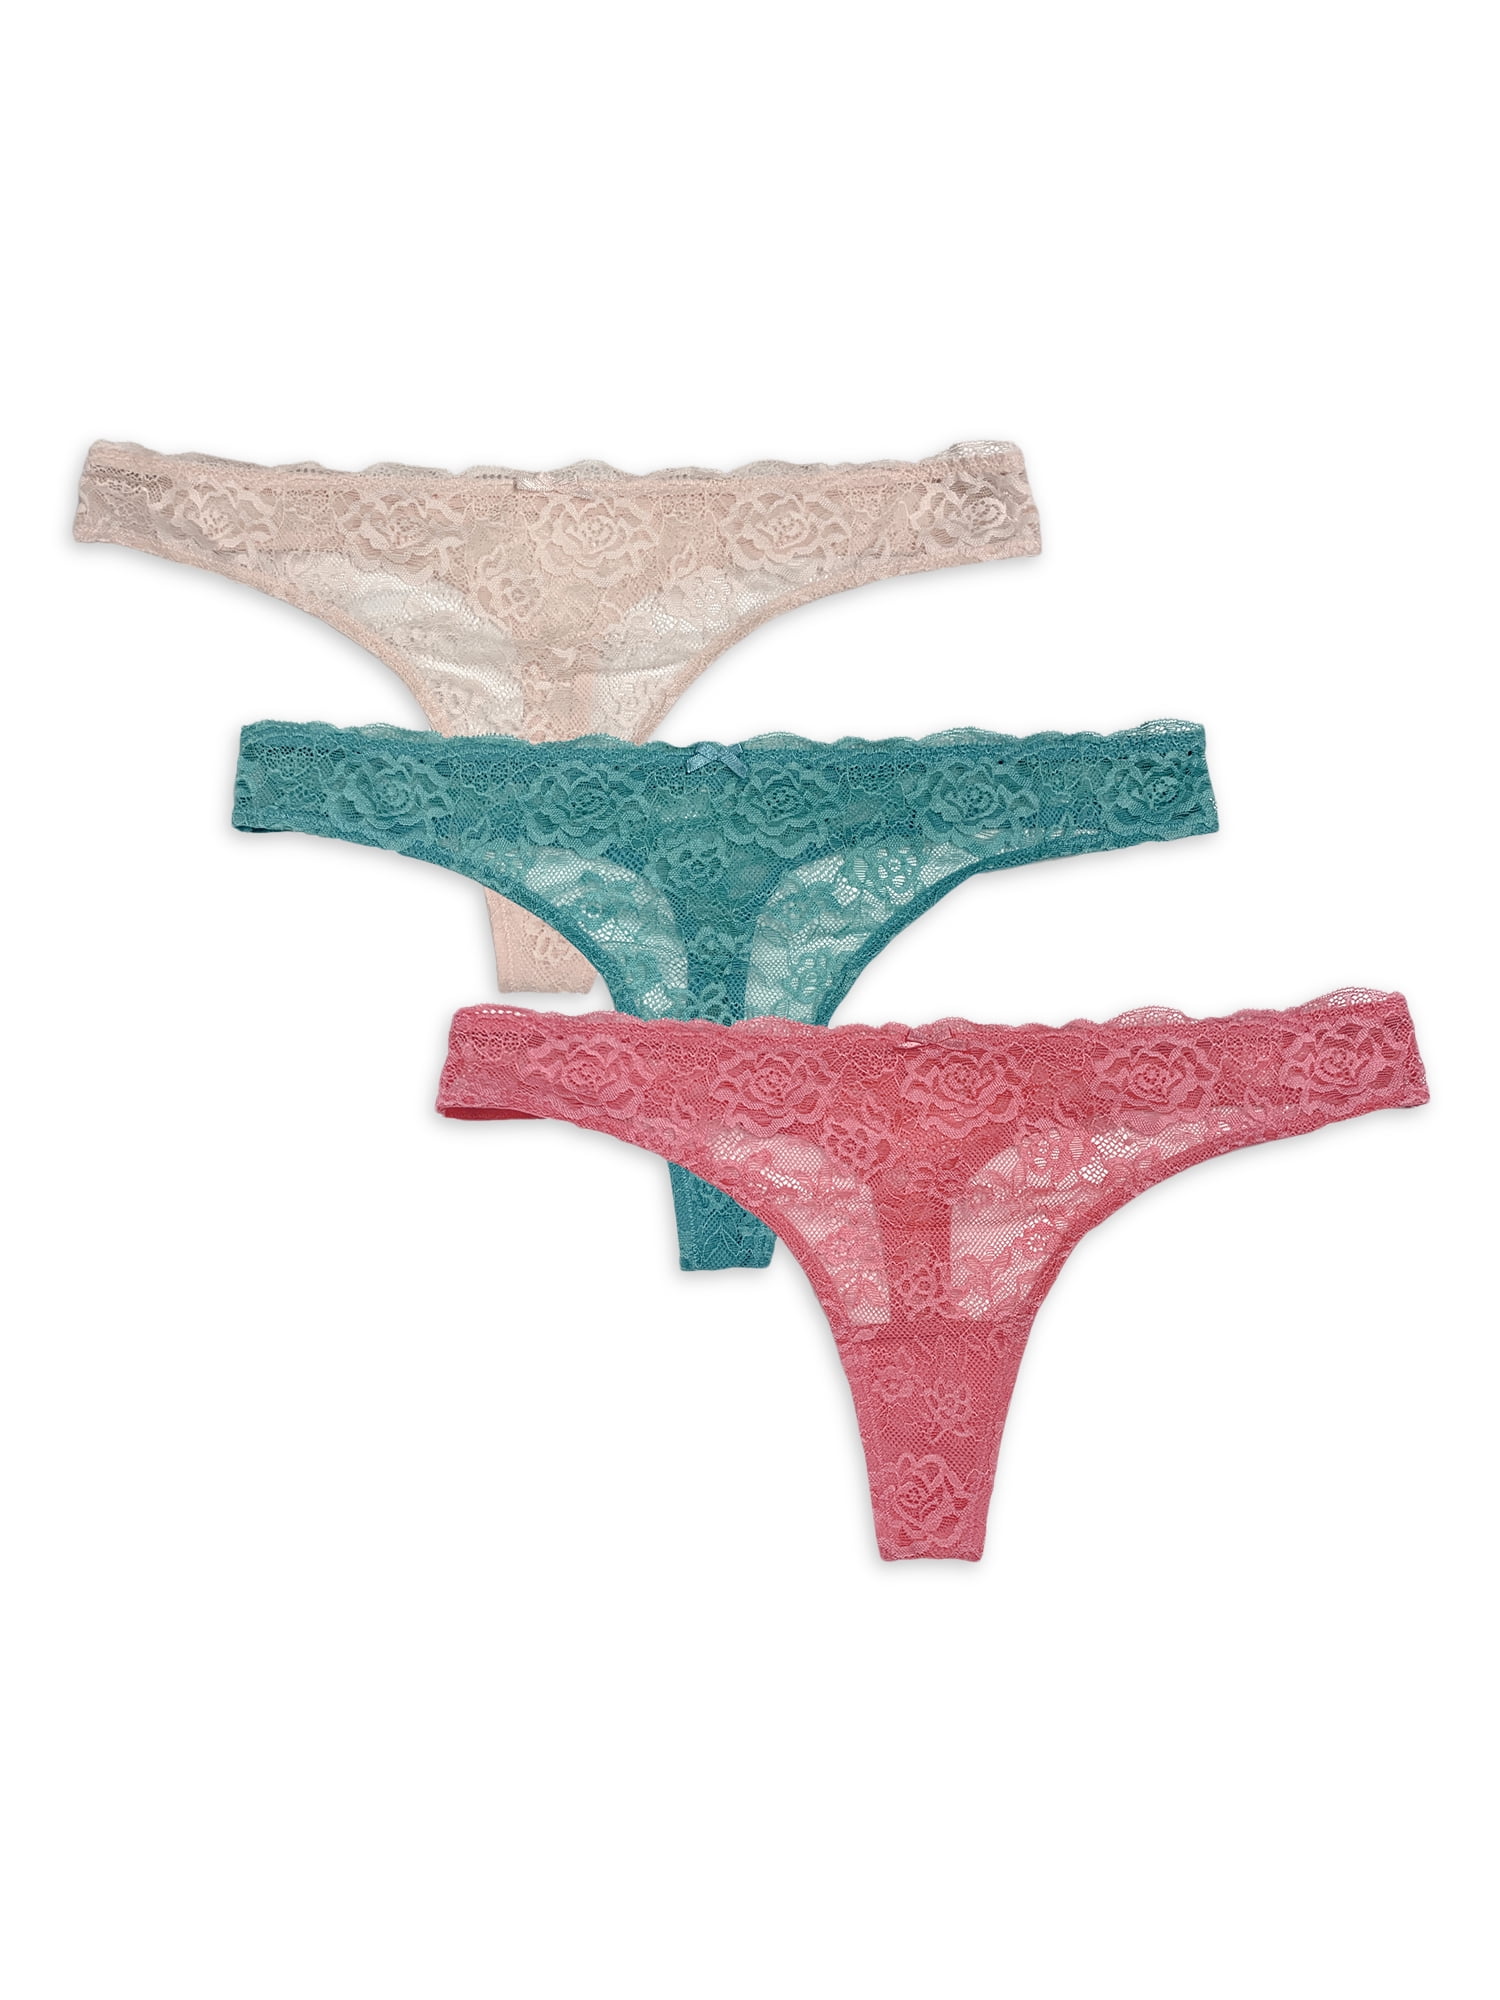 10 SECRET TREASURES All Over Lace Nylon Thong Panties 3 Pack Size XXXL #WC51 